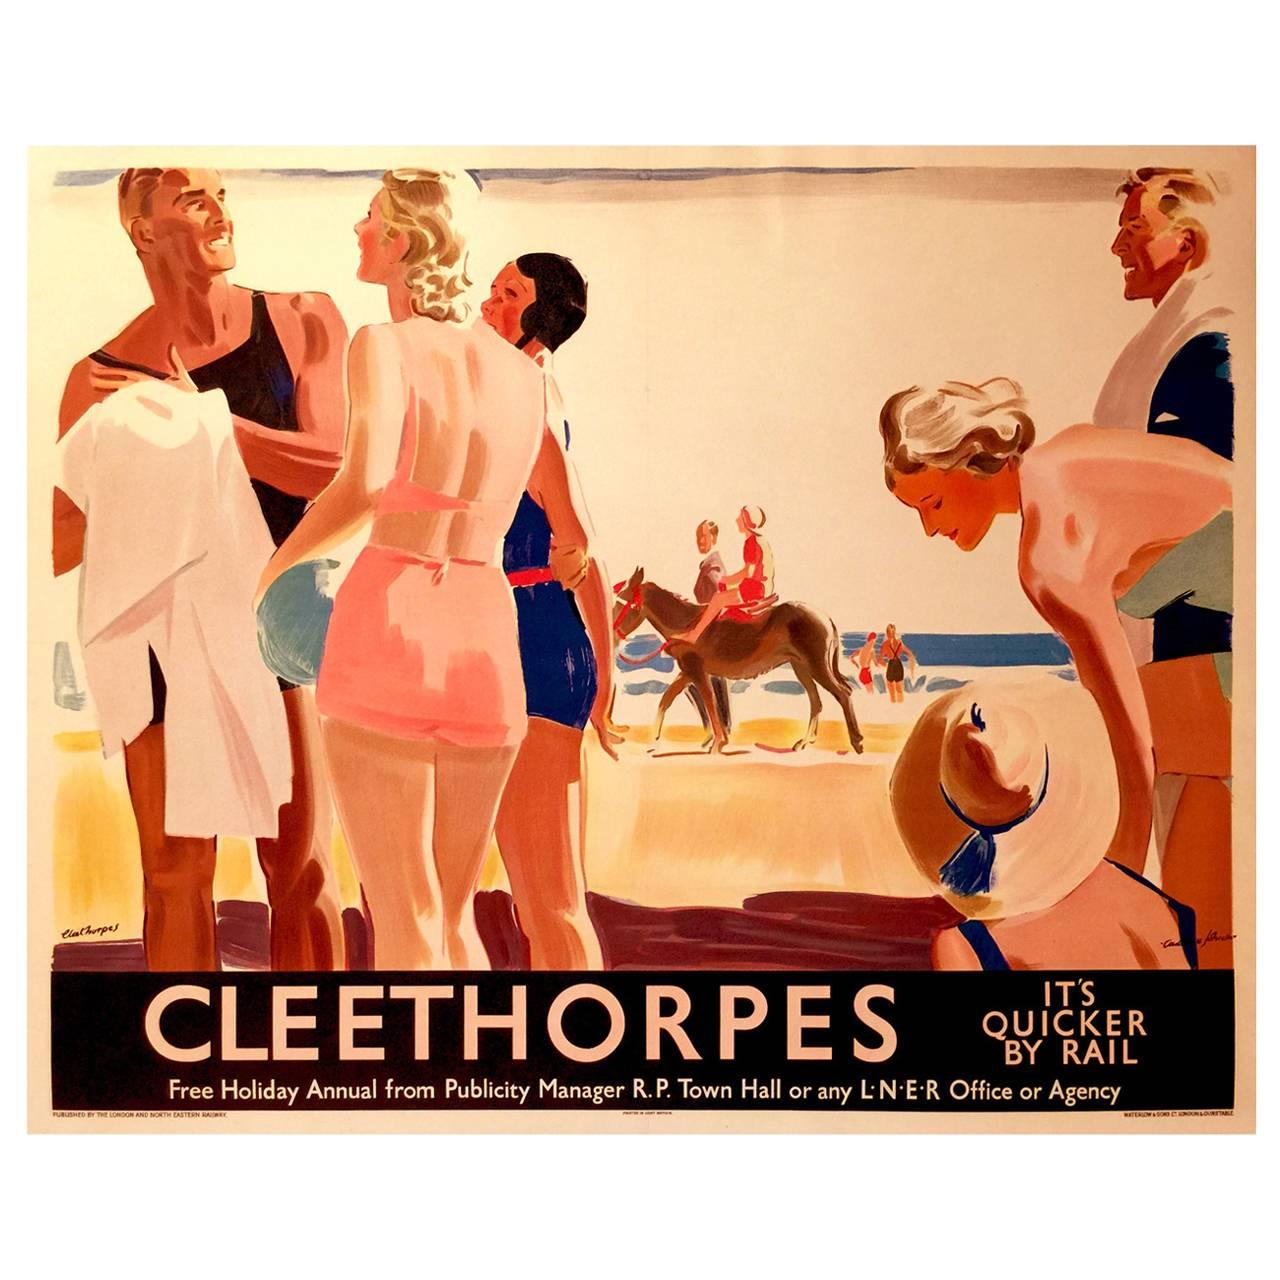 English Art Deco Period Travel Poster for Cleethorpes English Seaside, 1925